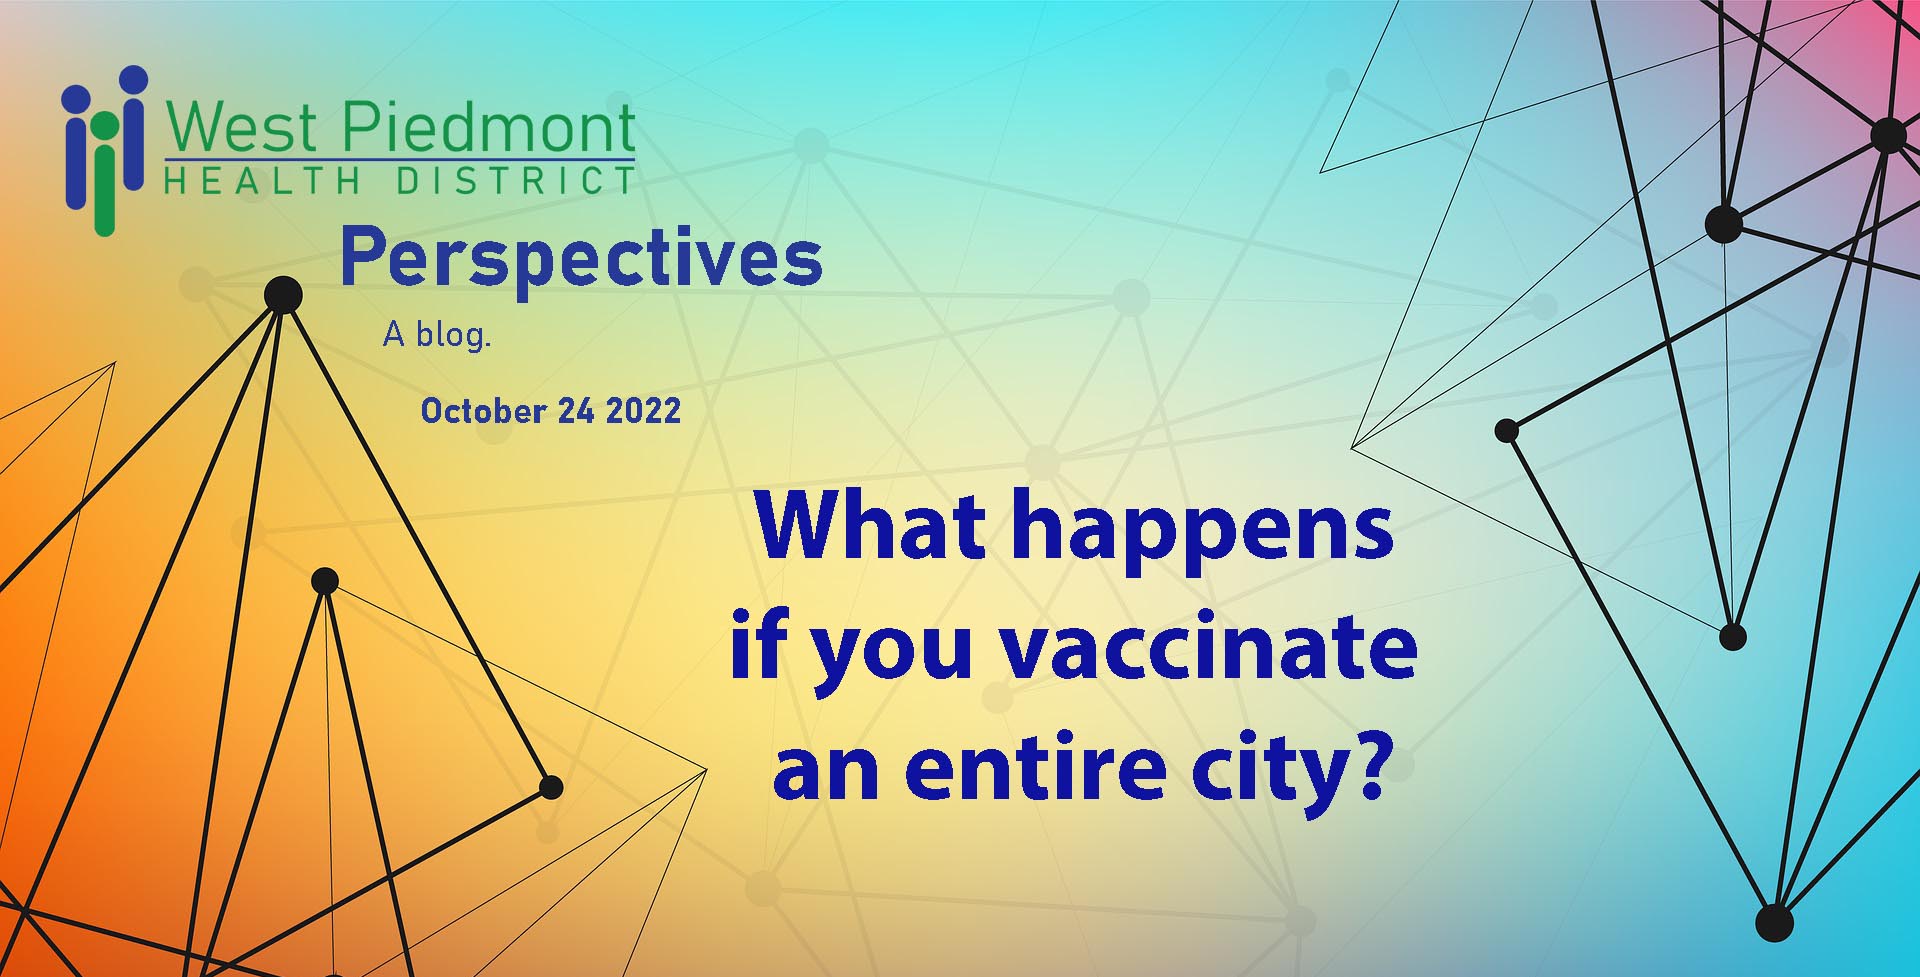 Perspectives cover with question what happens if you vaccinate an entire city?